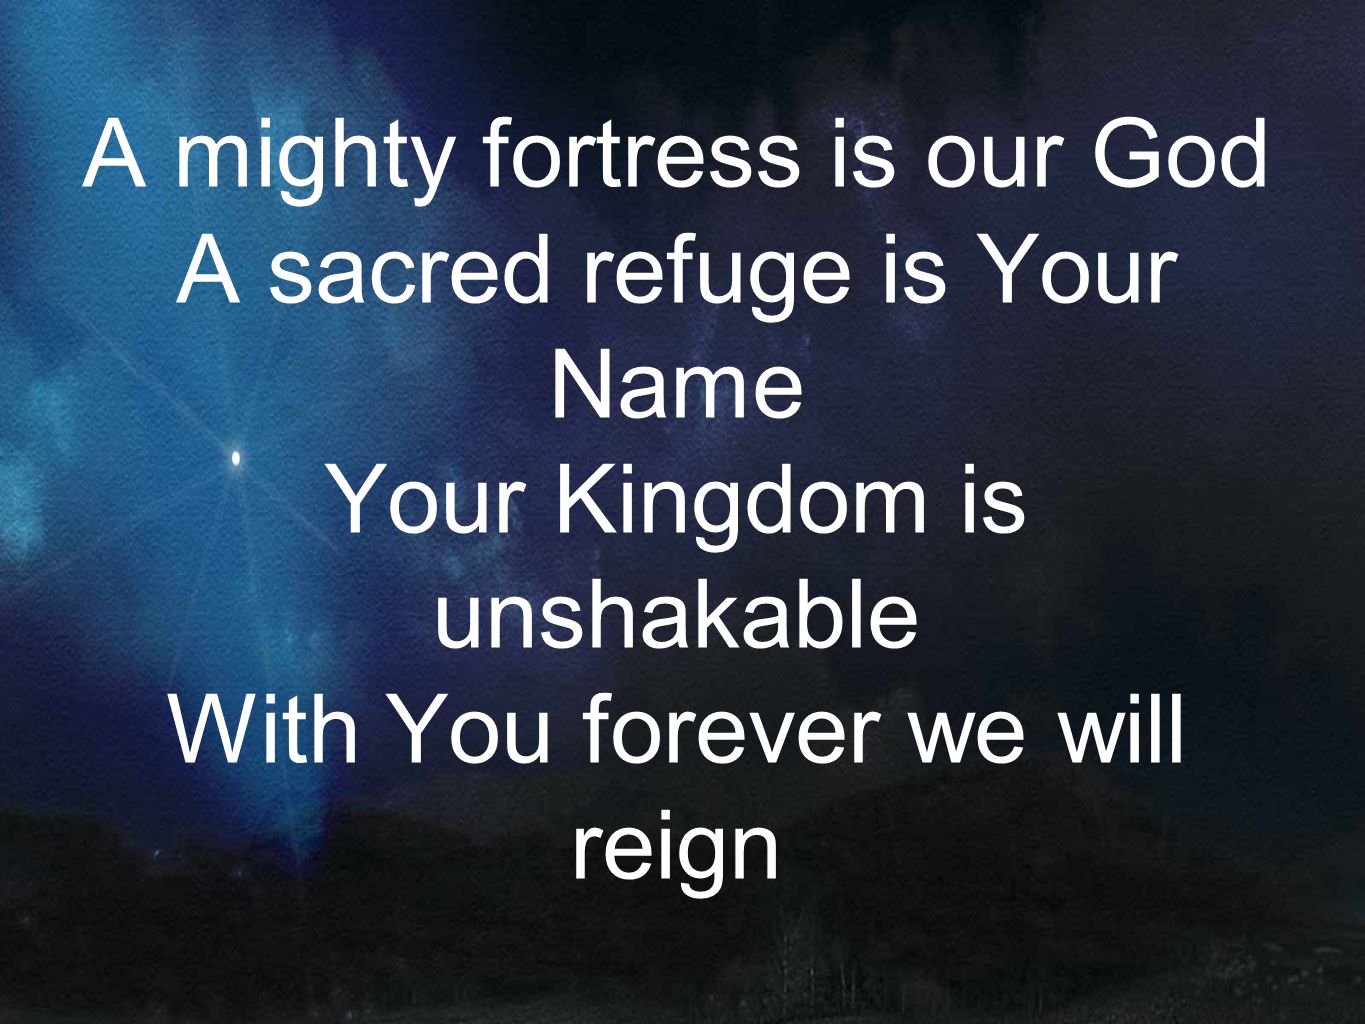 A mighty fortress is our God A sacred refuge is Your Name Your Kingdom is unshakable With You forever we will reign